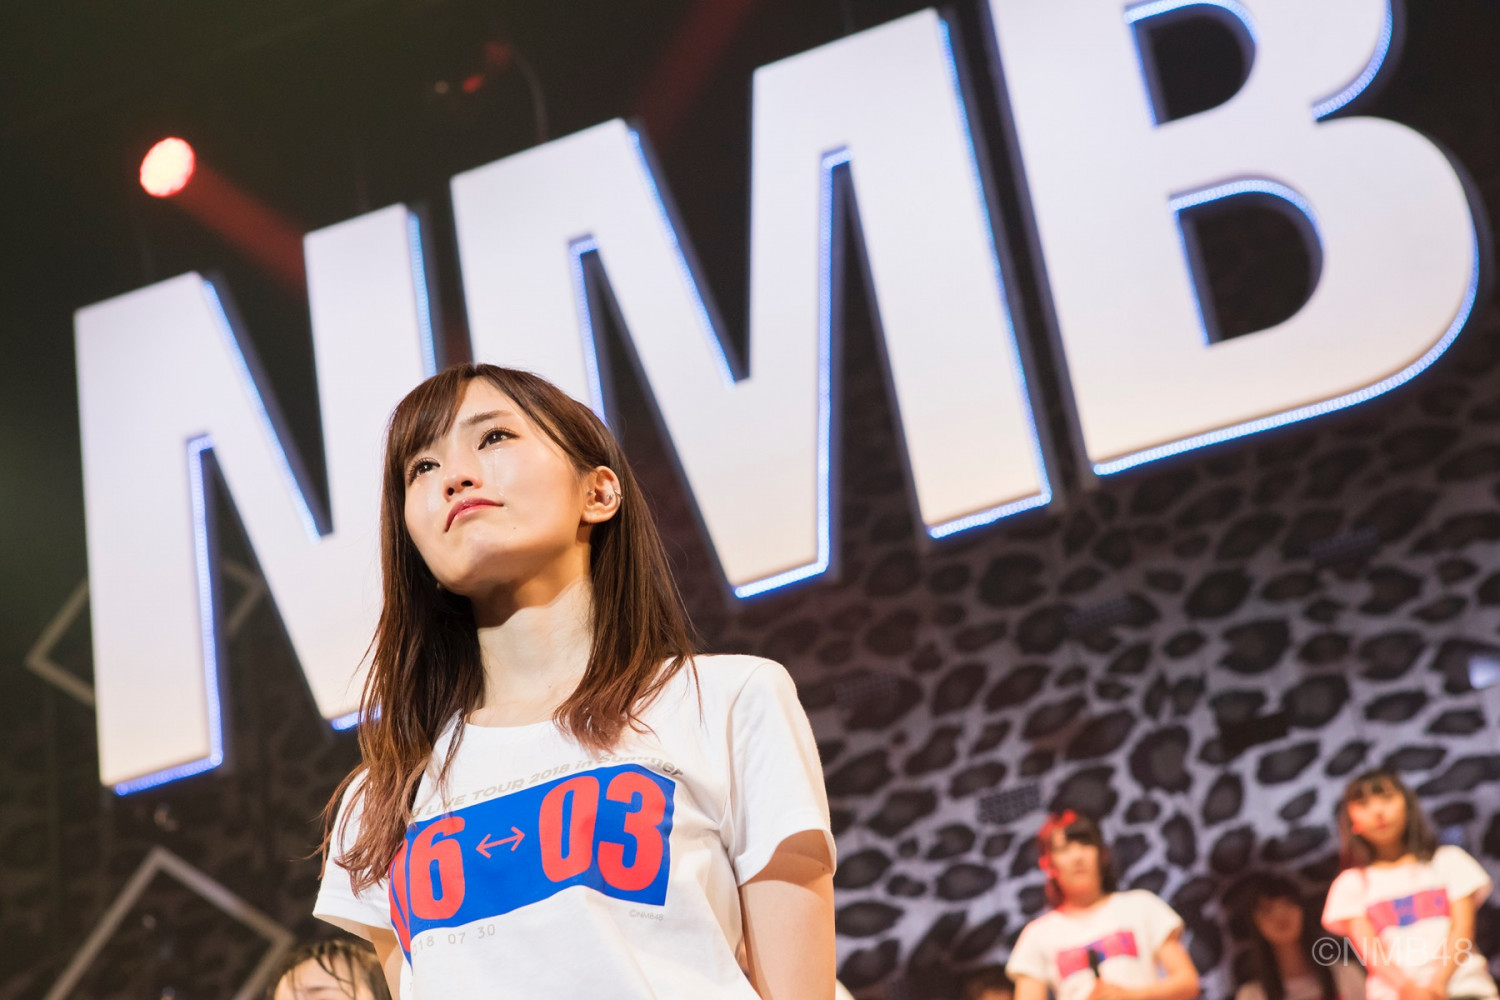 Sayaka Yamamoto Announces Graduation on The First Day of NMB48’s Tour